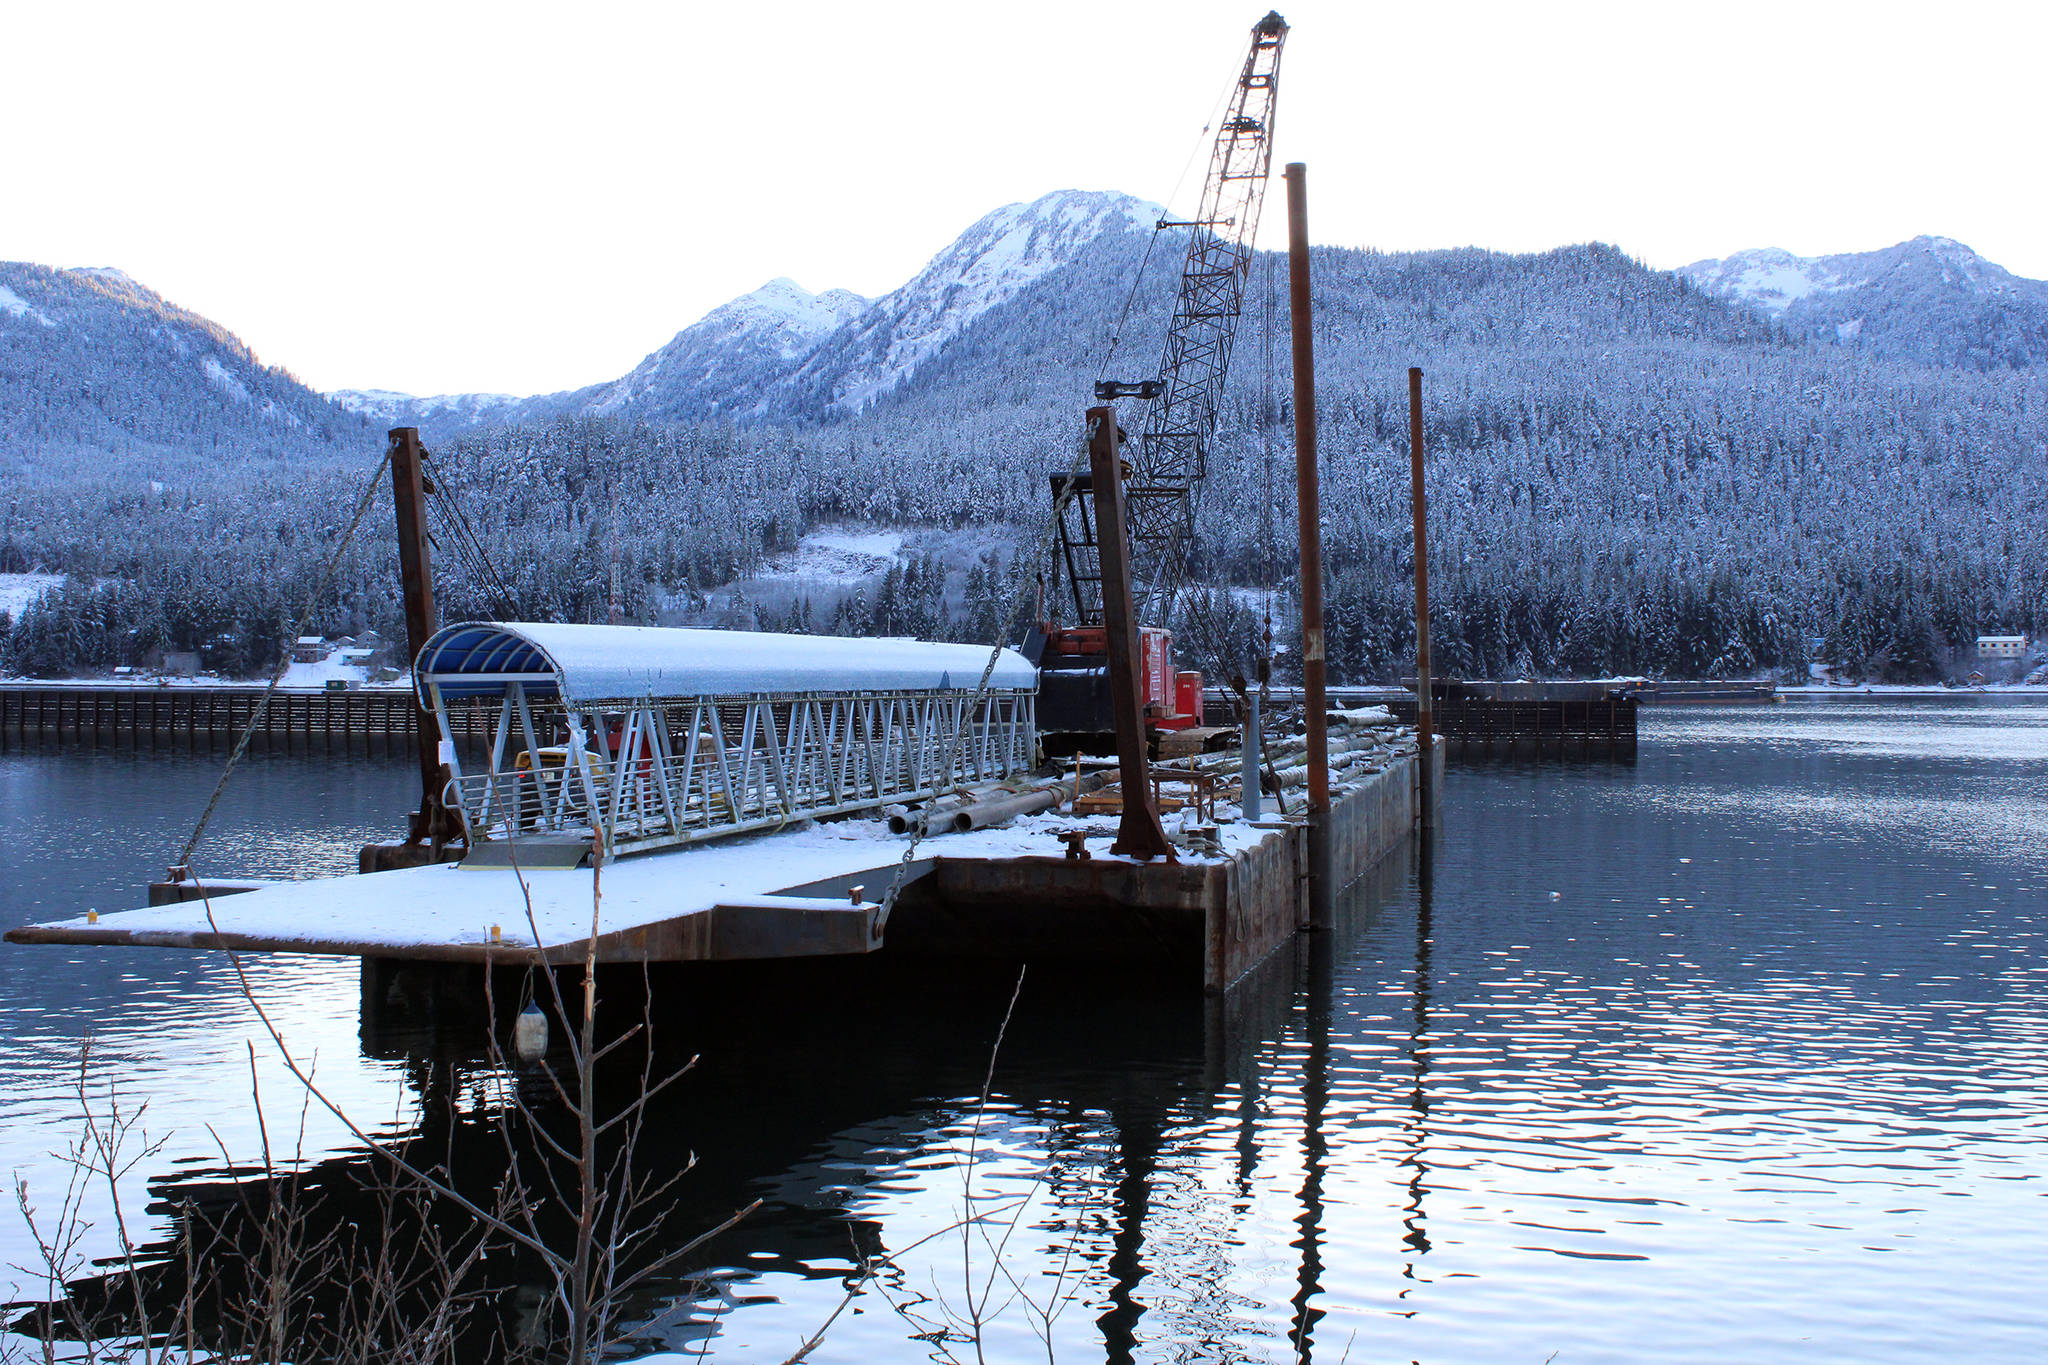 Work on Aurora Harbor is just part of City and Borough of Juneau’s Docks and Harbors’ ongoing slate of projects, including work on Don. D Statter Harbor and basin clearing at Harris Harbor. (Ben Hohenstatt / Juneau Empire)